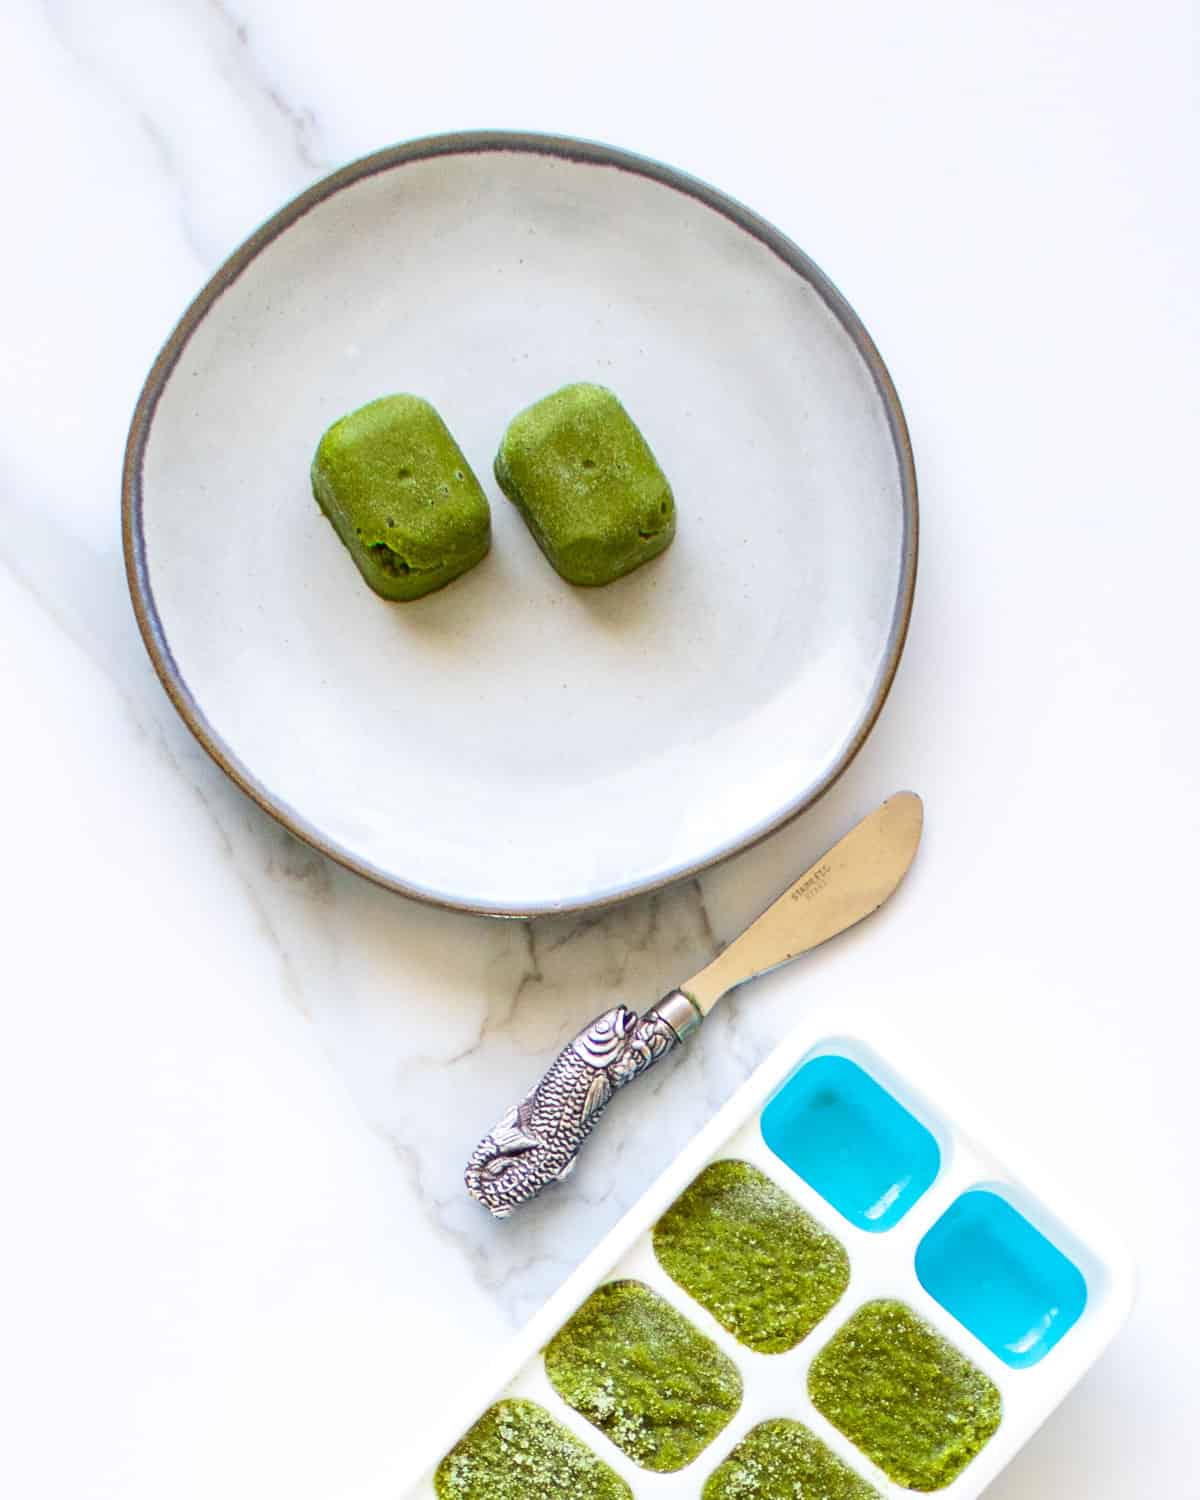 Frozen cubes of green curry paste.